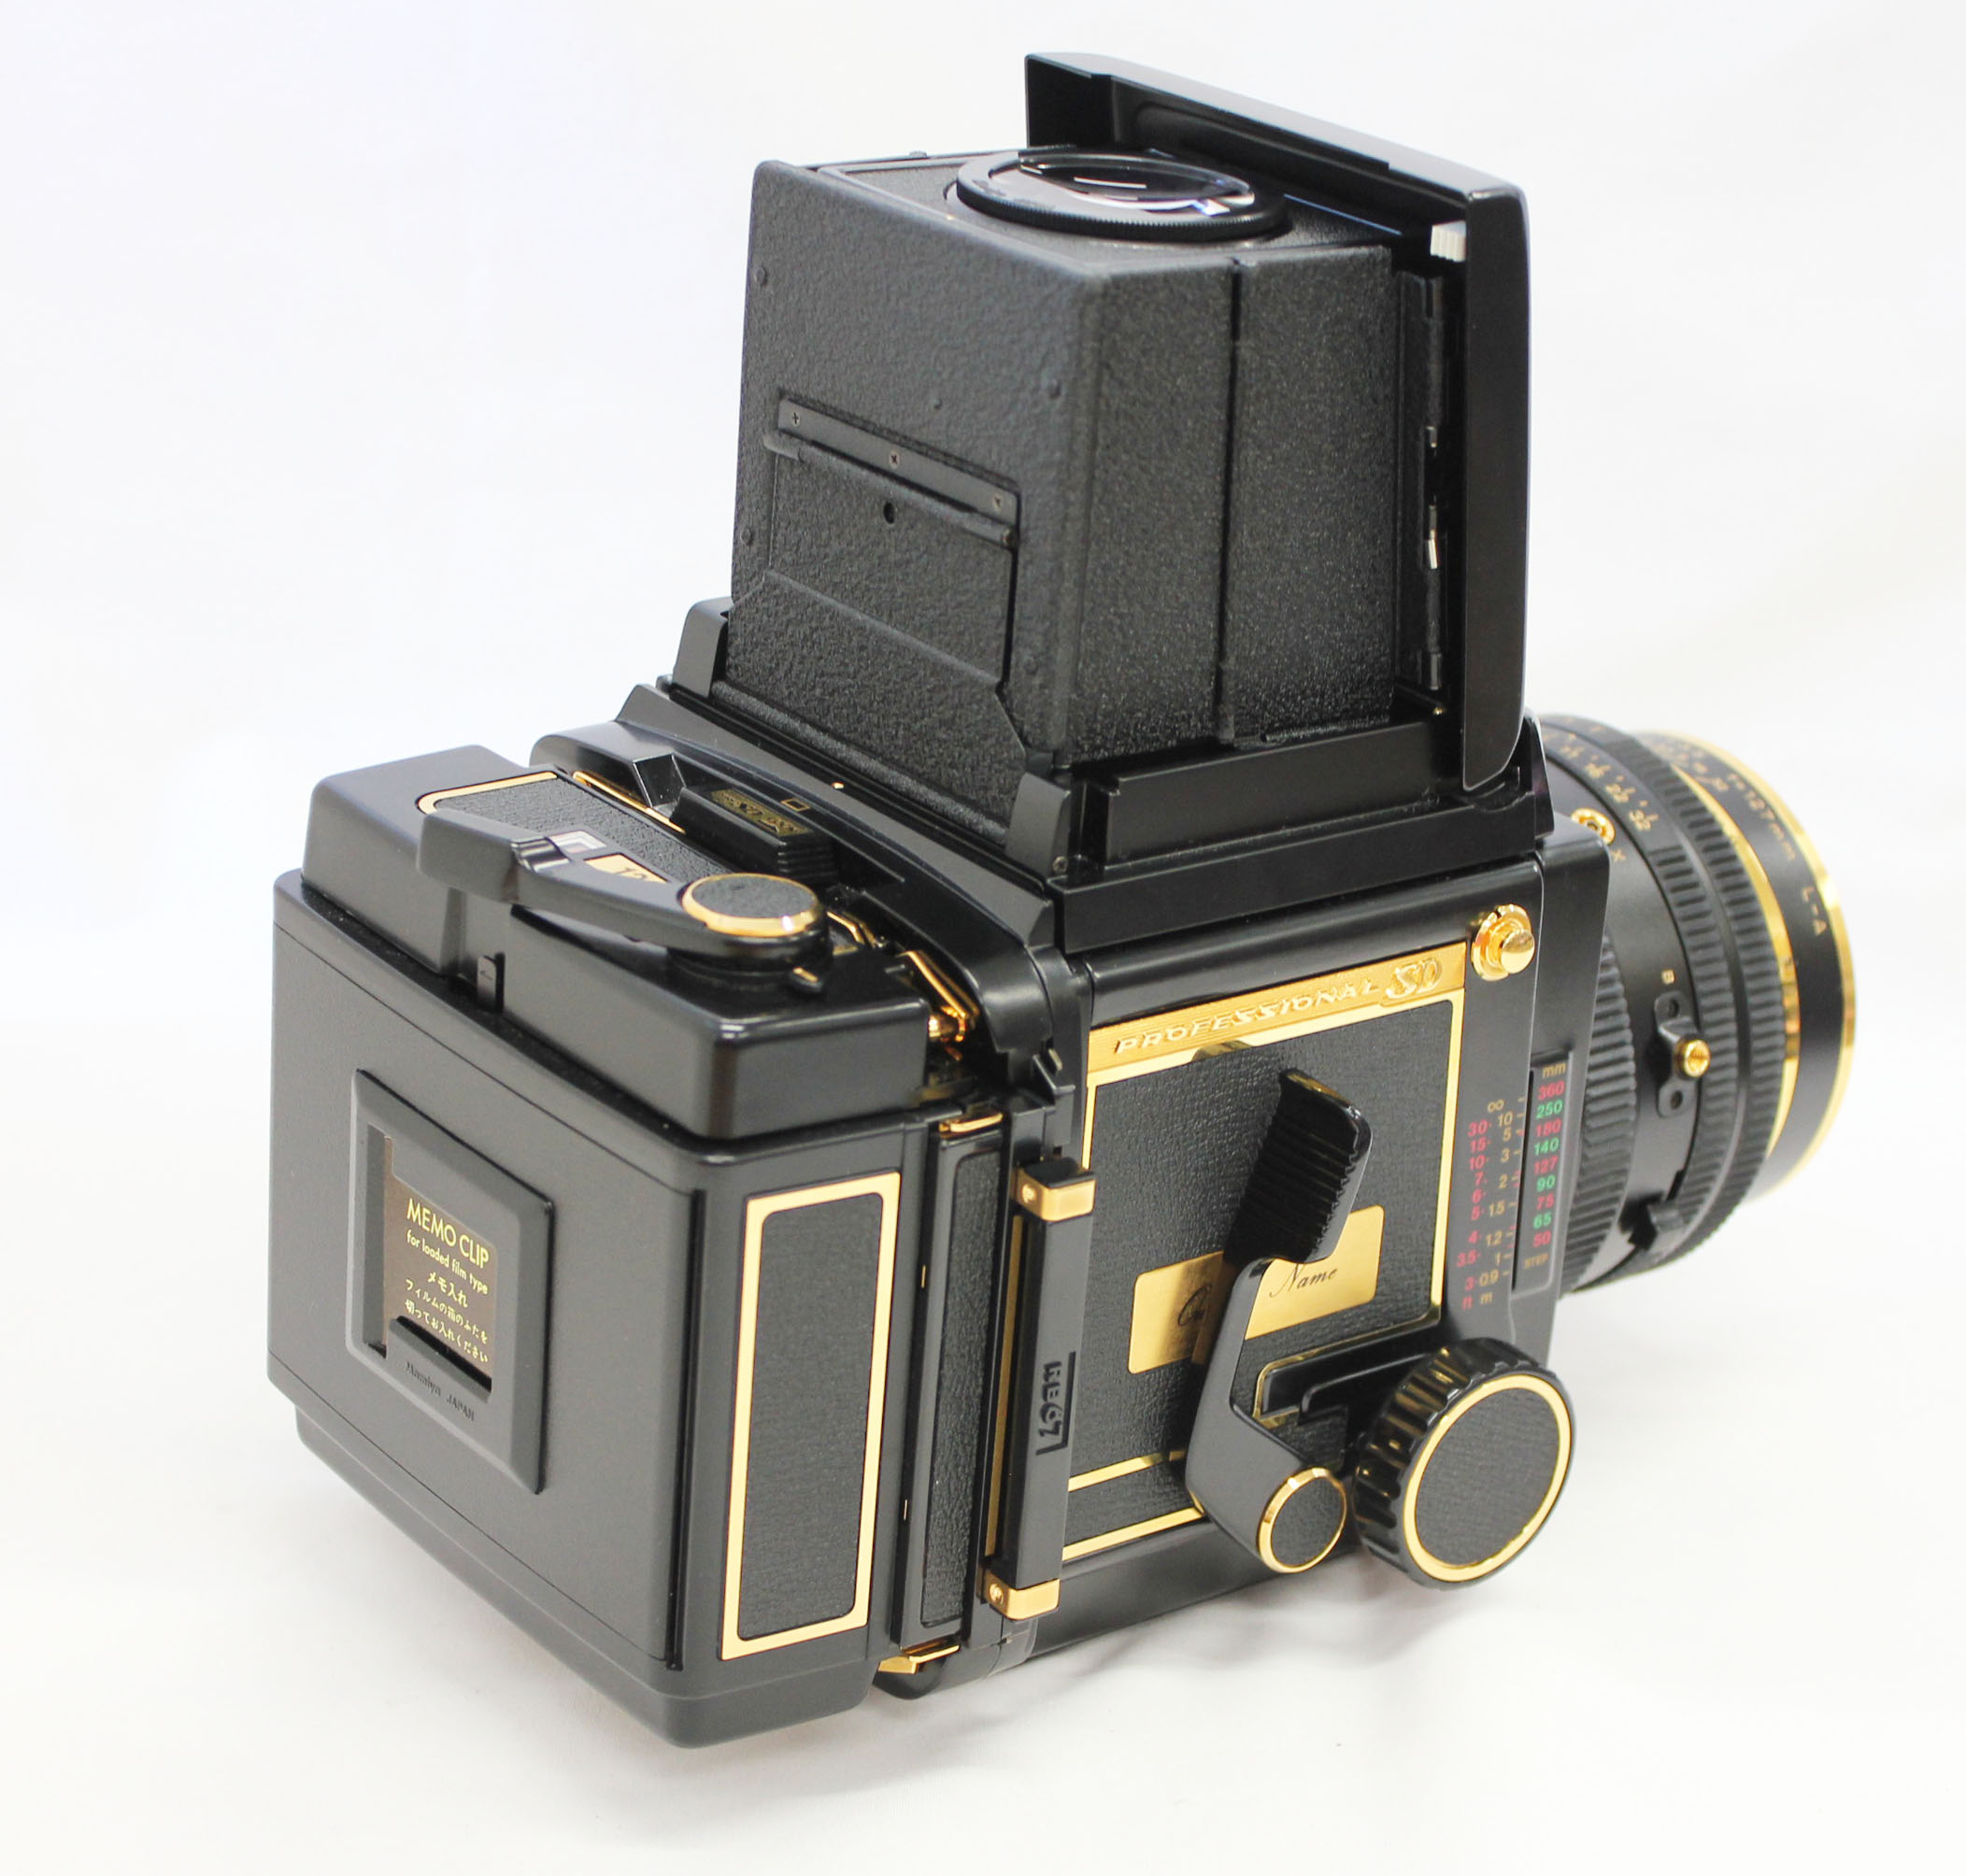 Mamiya RB67 Pro SD Gold K/L 127mm F/3.5 50 Years Limited Edition of 300 from Japan Photo 4